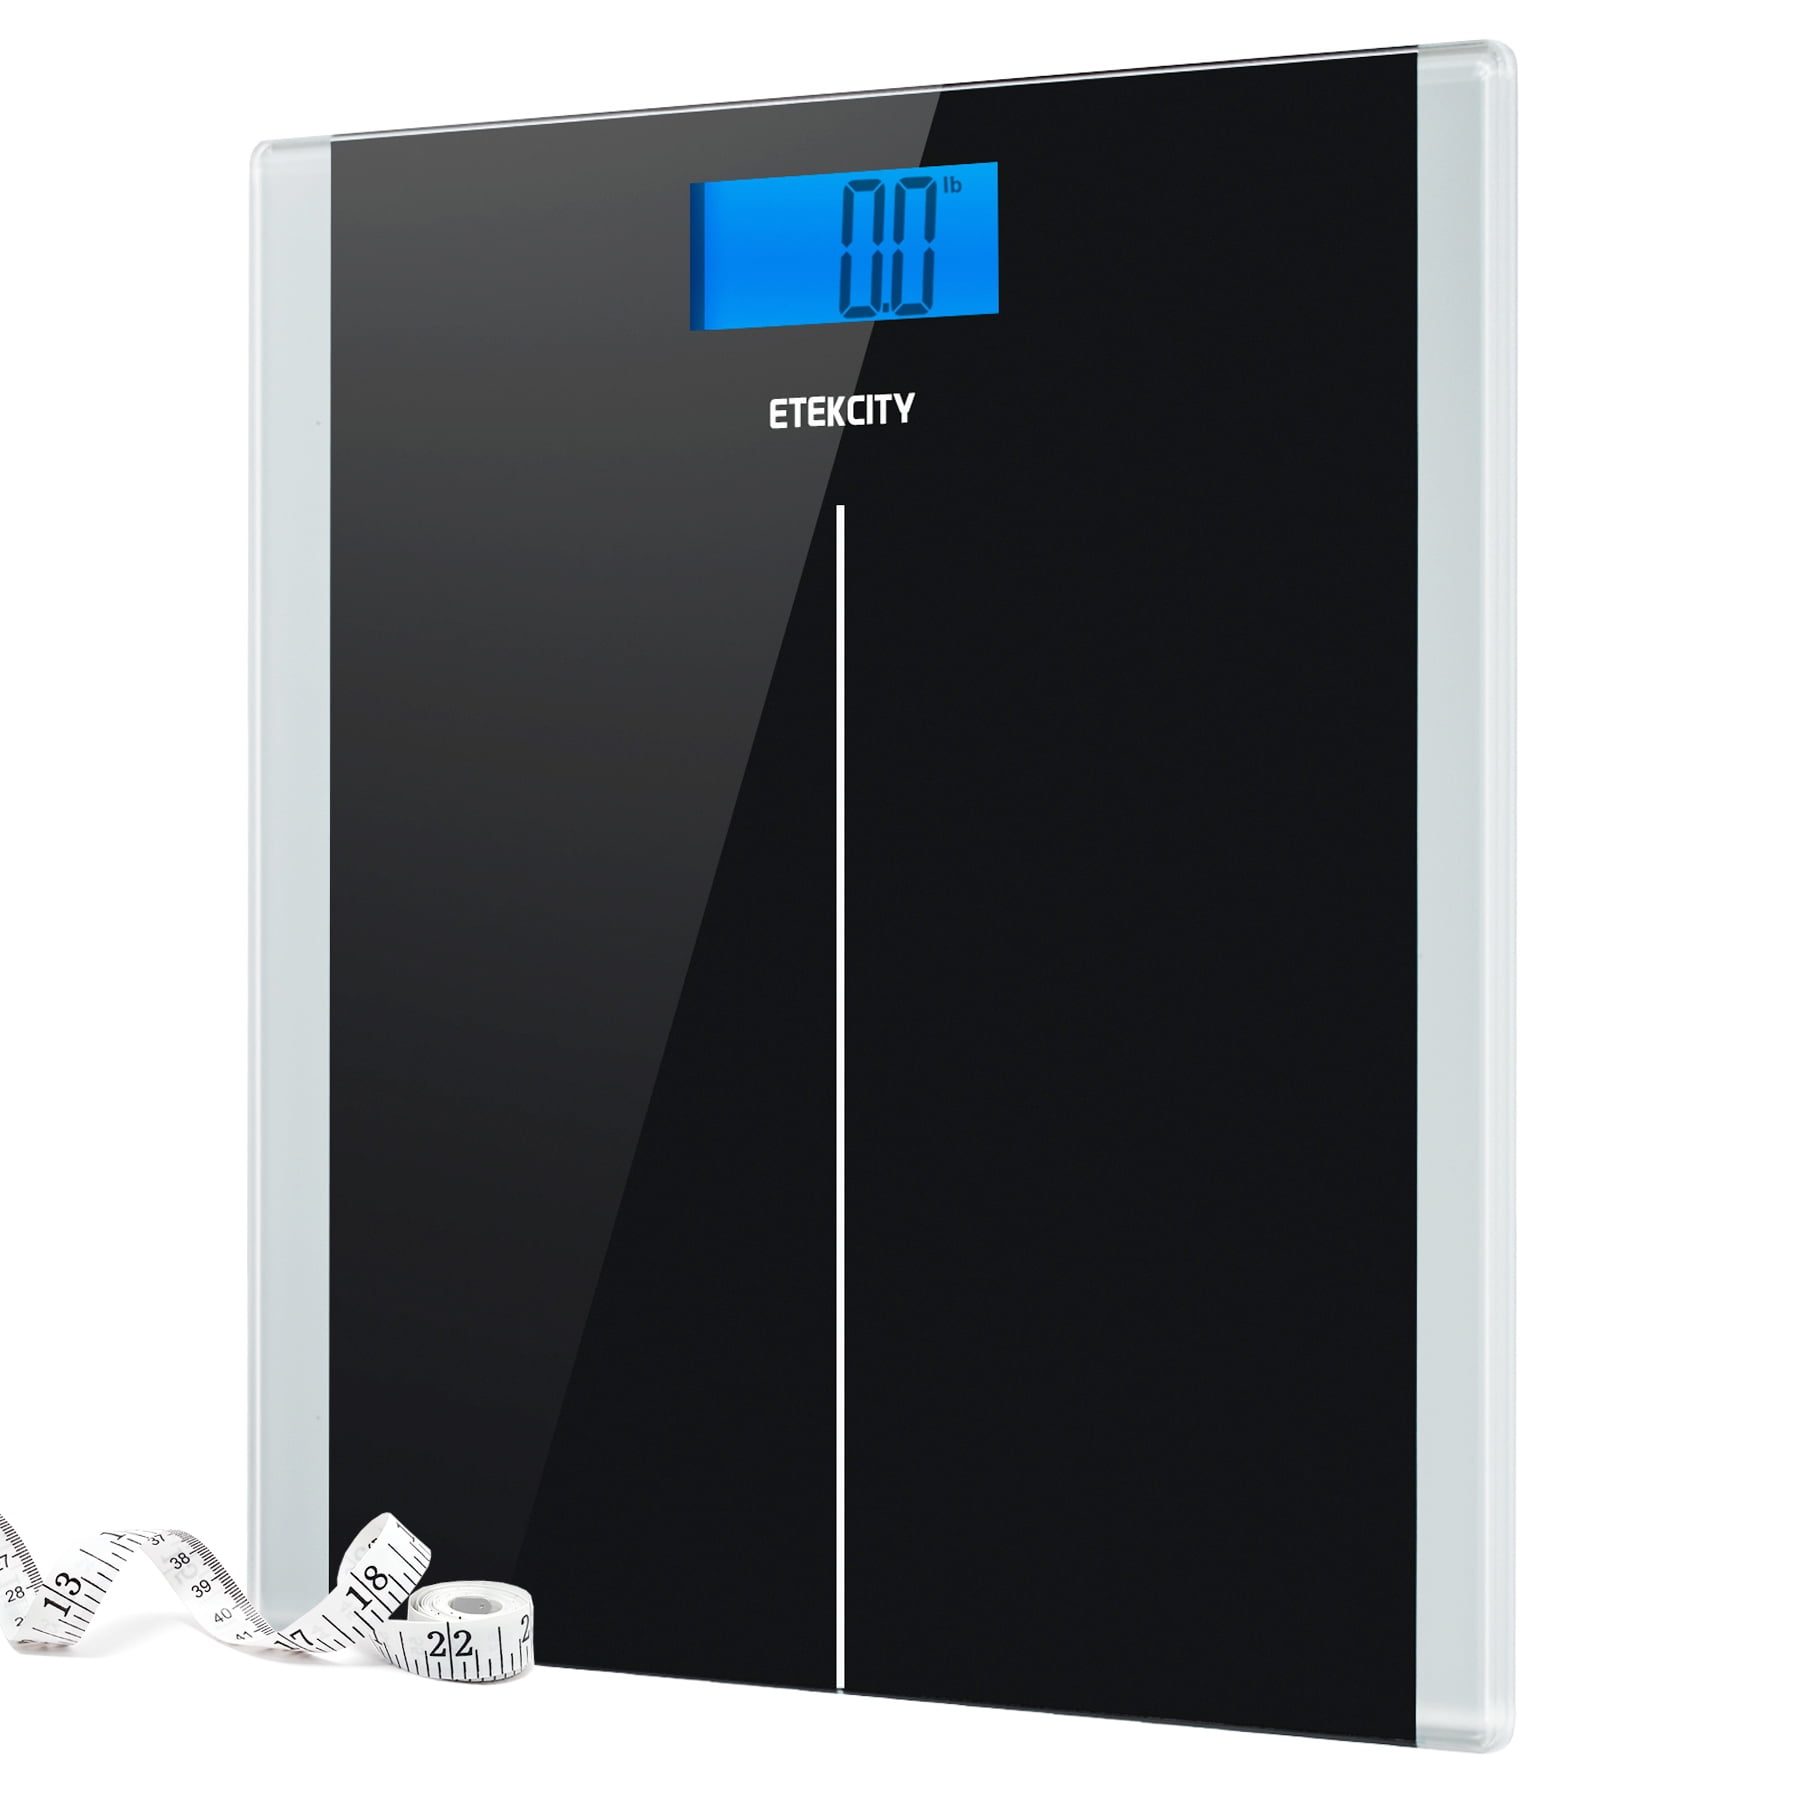 Etekcity Digital Body Weight Bathroom Scale With Body Tape Measure And Round Cor 